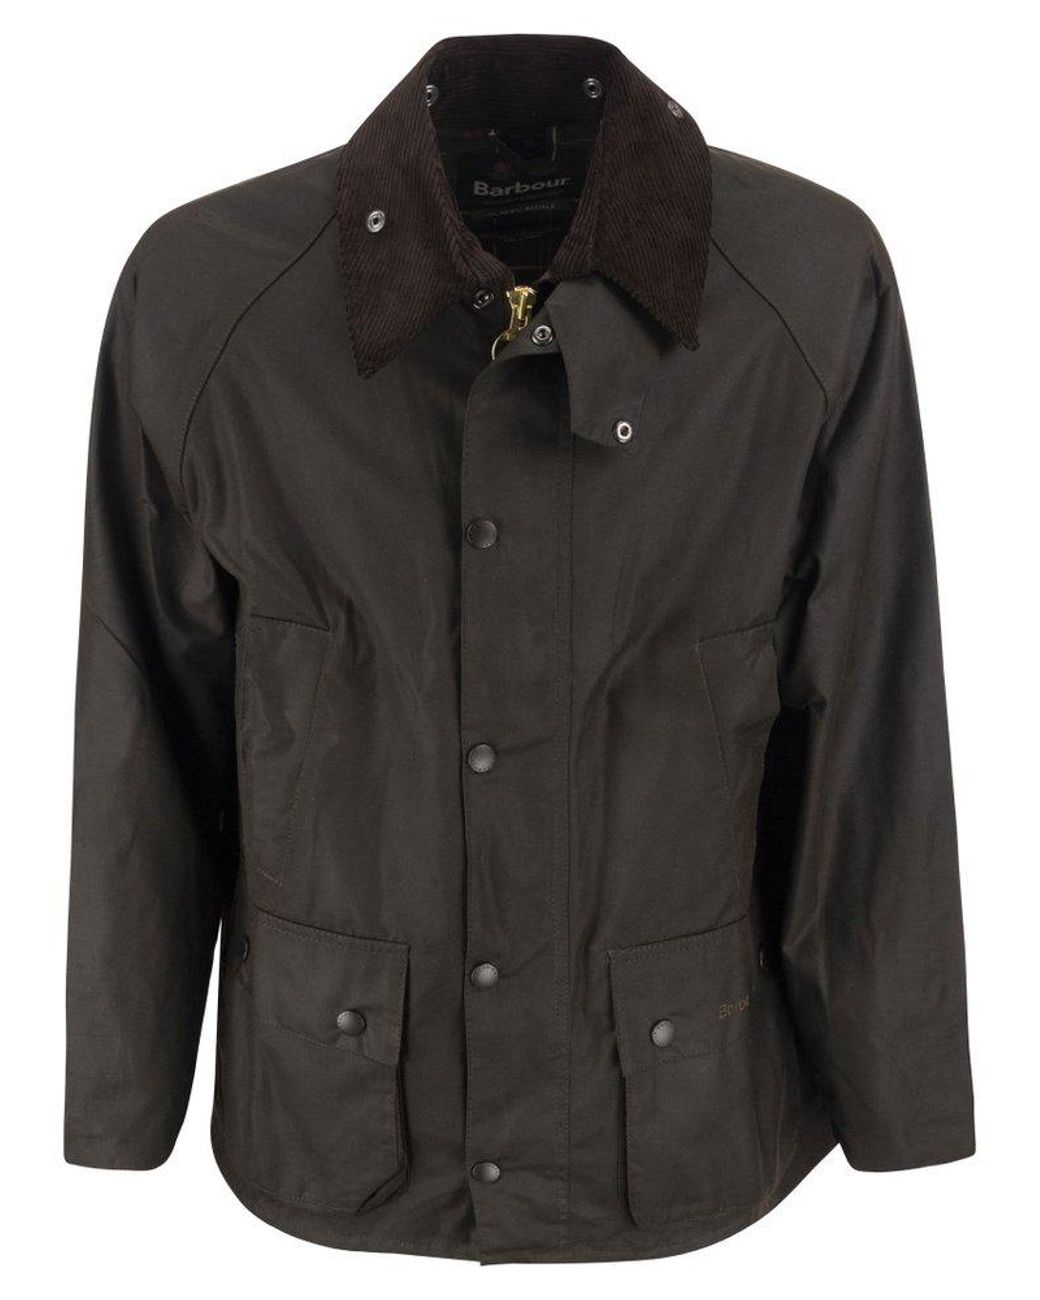 Barbour Bedale Snap-fastened Long Sleeved Jacket in Black | Lyst Canada